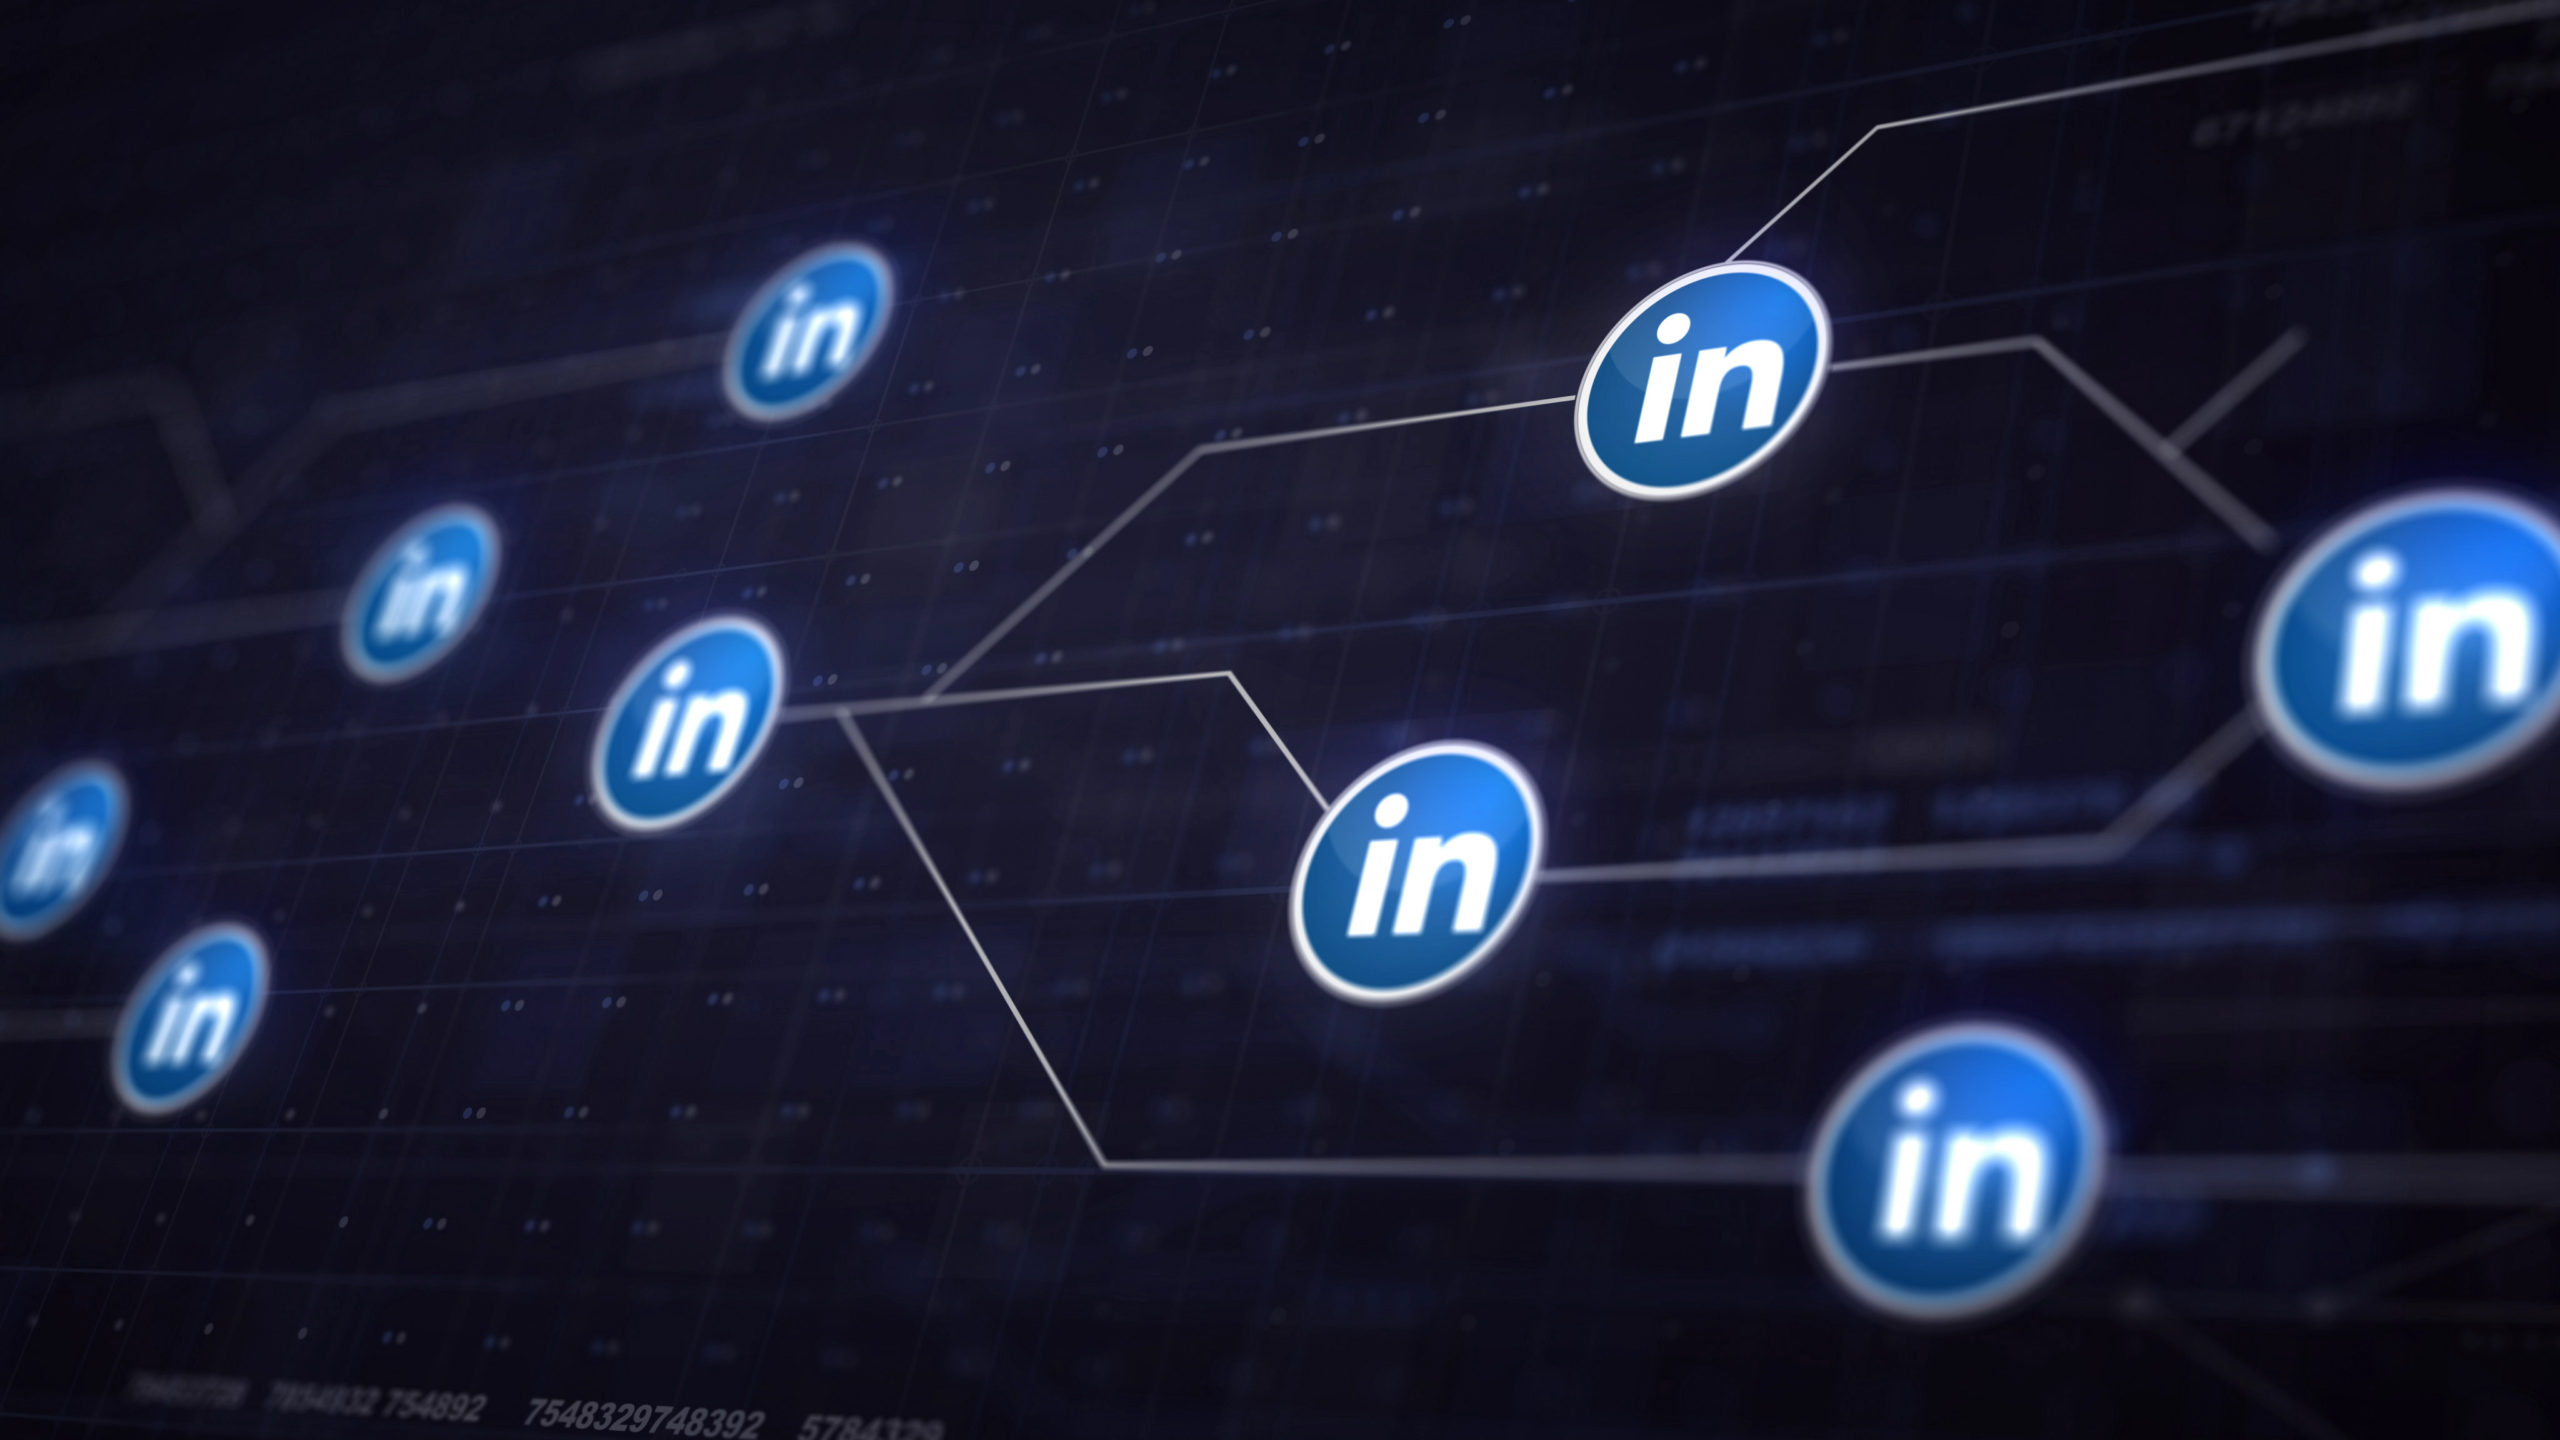 Linkedin has become the Ideal platform for B2B marketing. This forum today is not just a channel between job seekers and prospective employers.